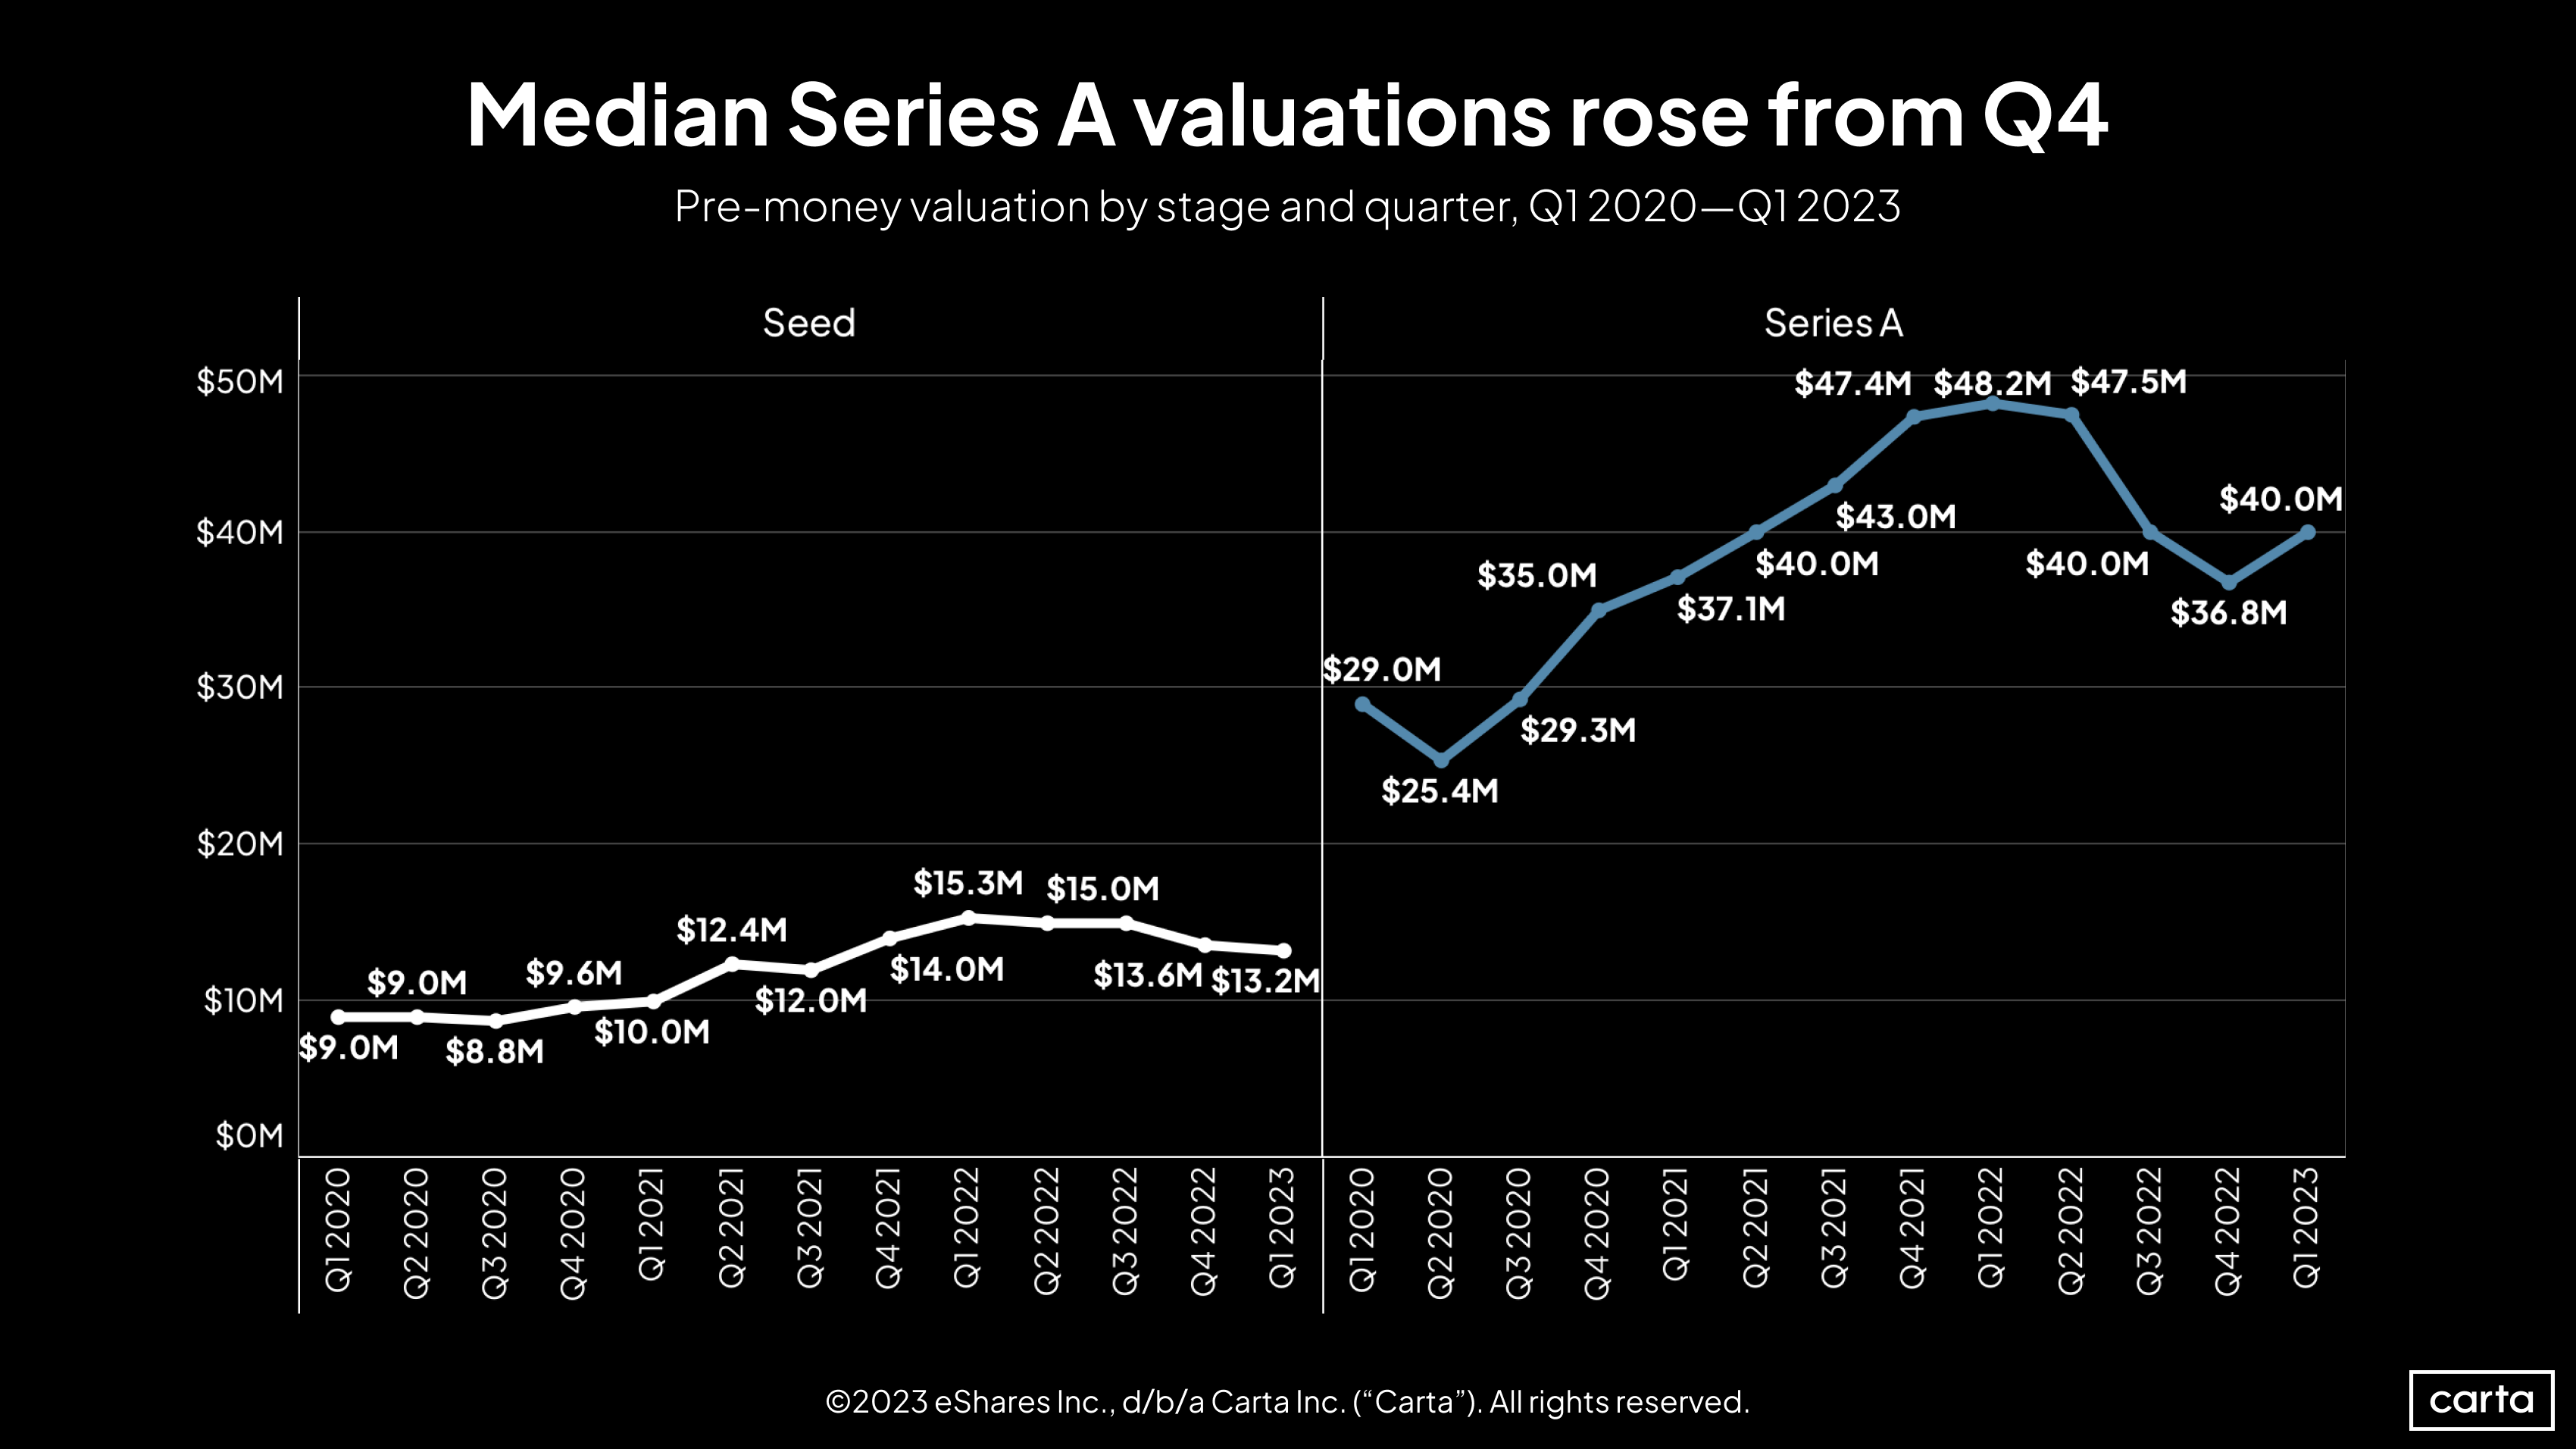 Pre-money valuation for seed and Series A companies by quarter, Q12020-Q12023